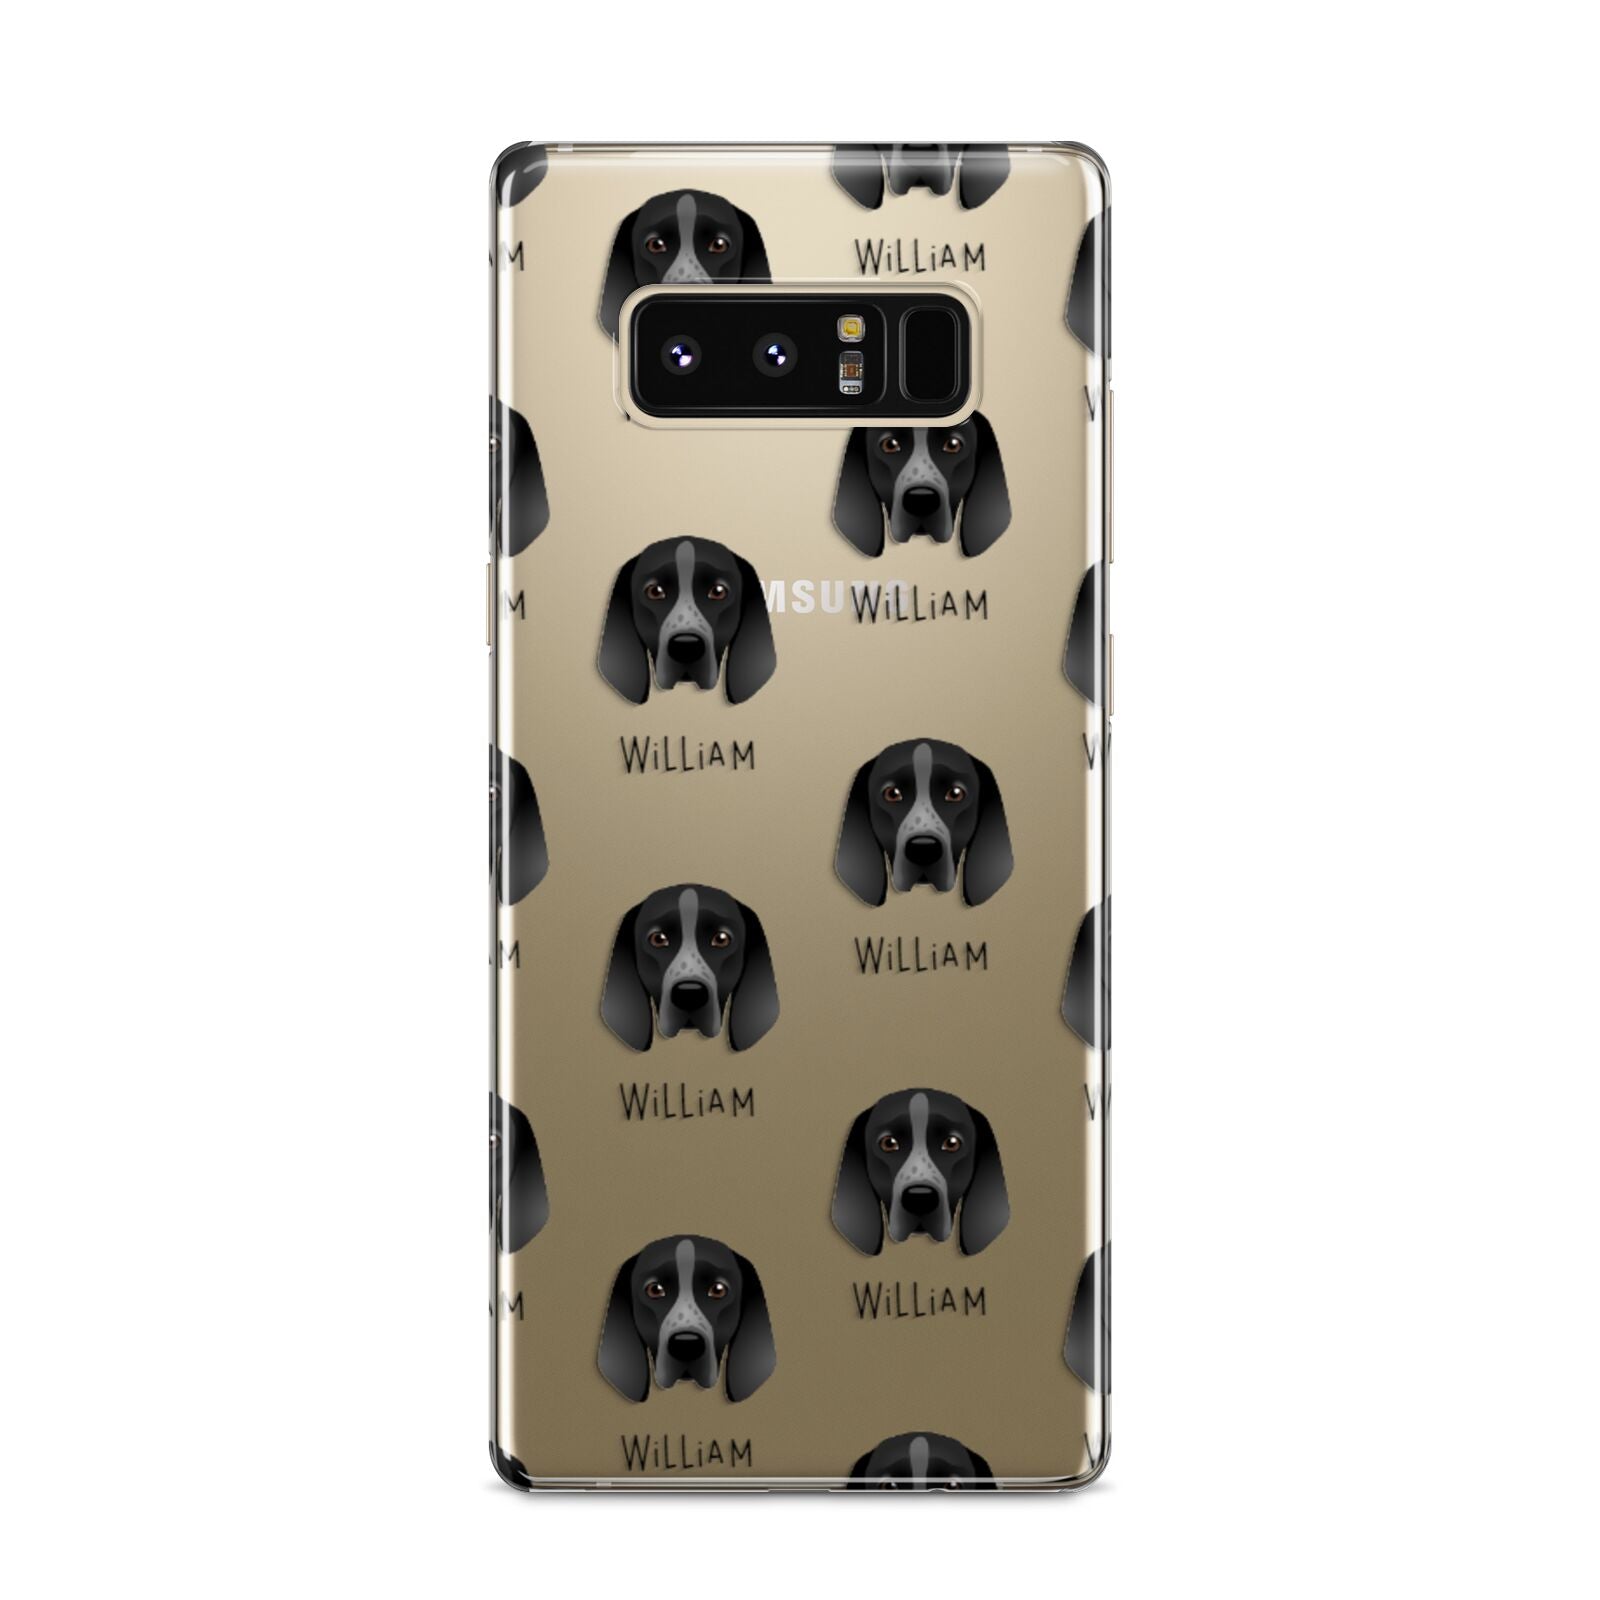 Braque D Auvergne Icon with Name Samsung Galaxy S8 Case